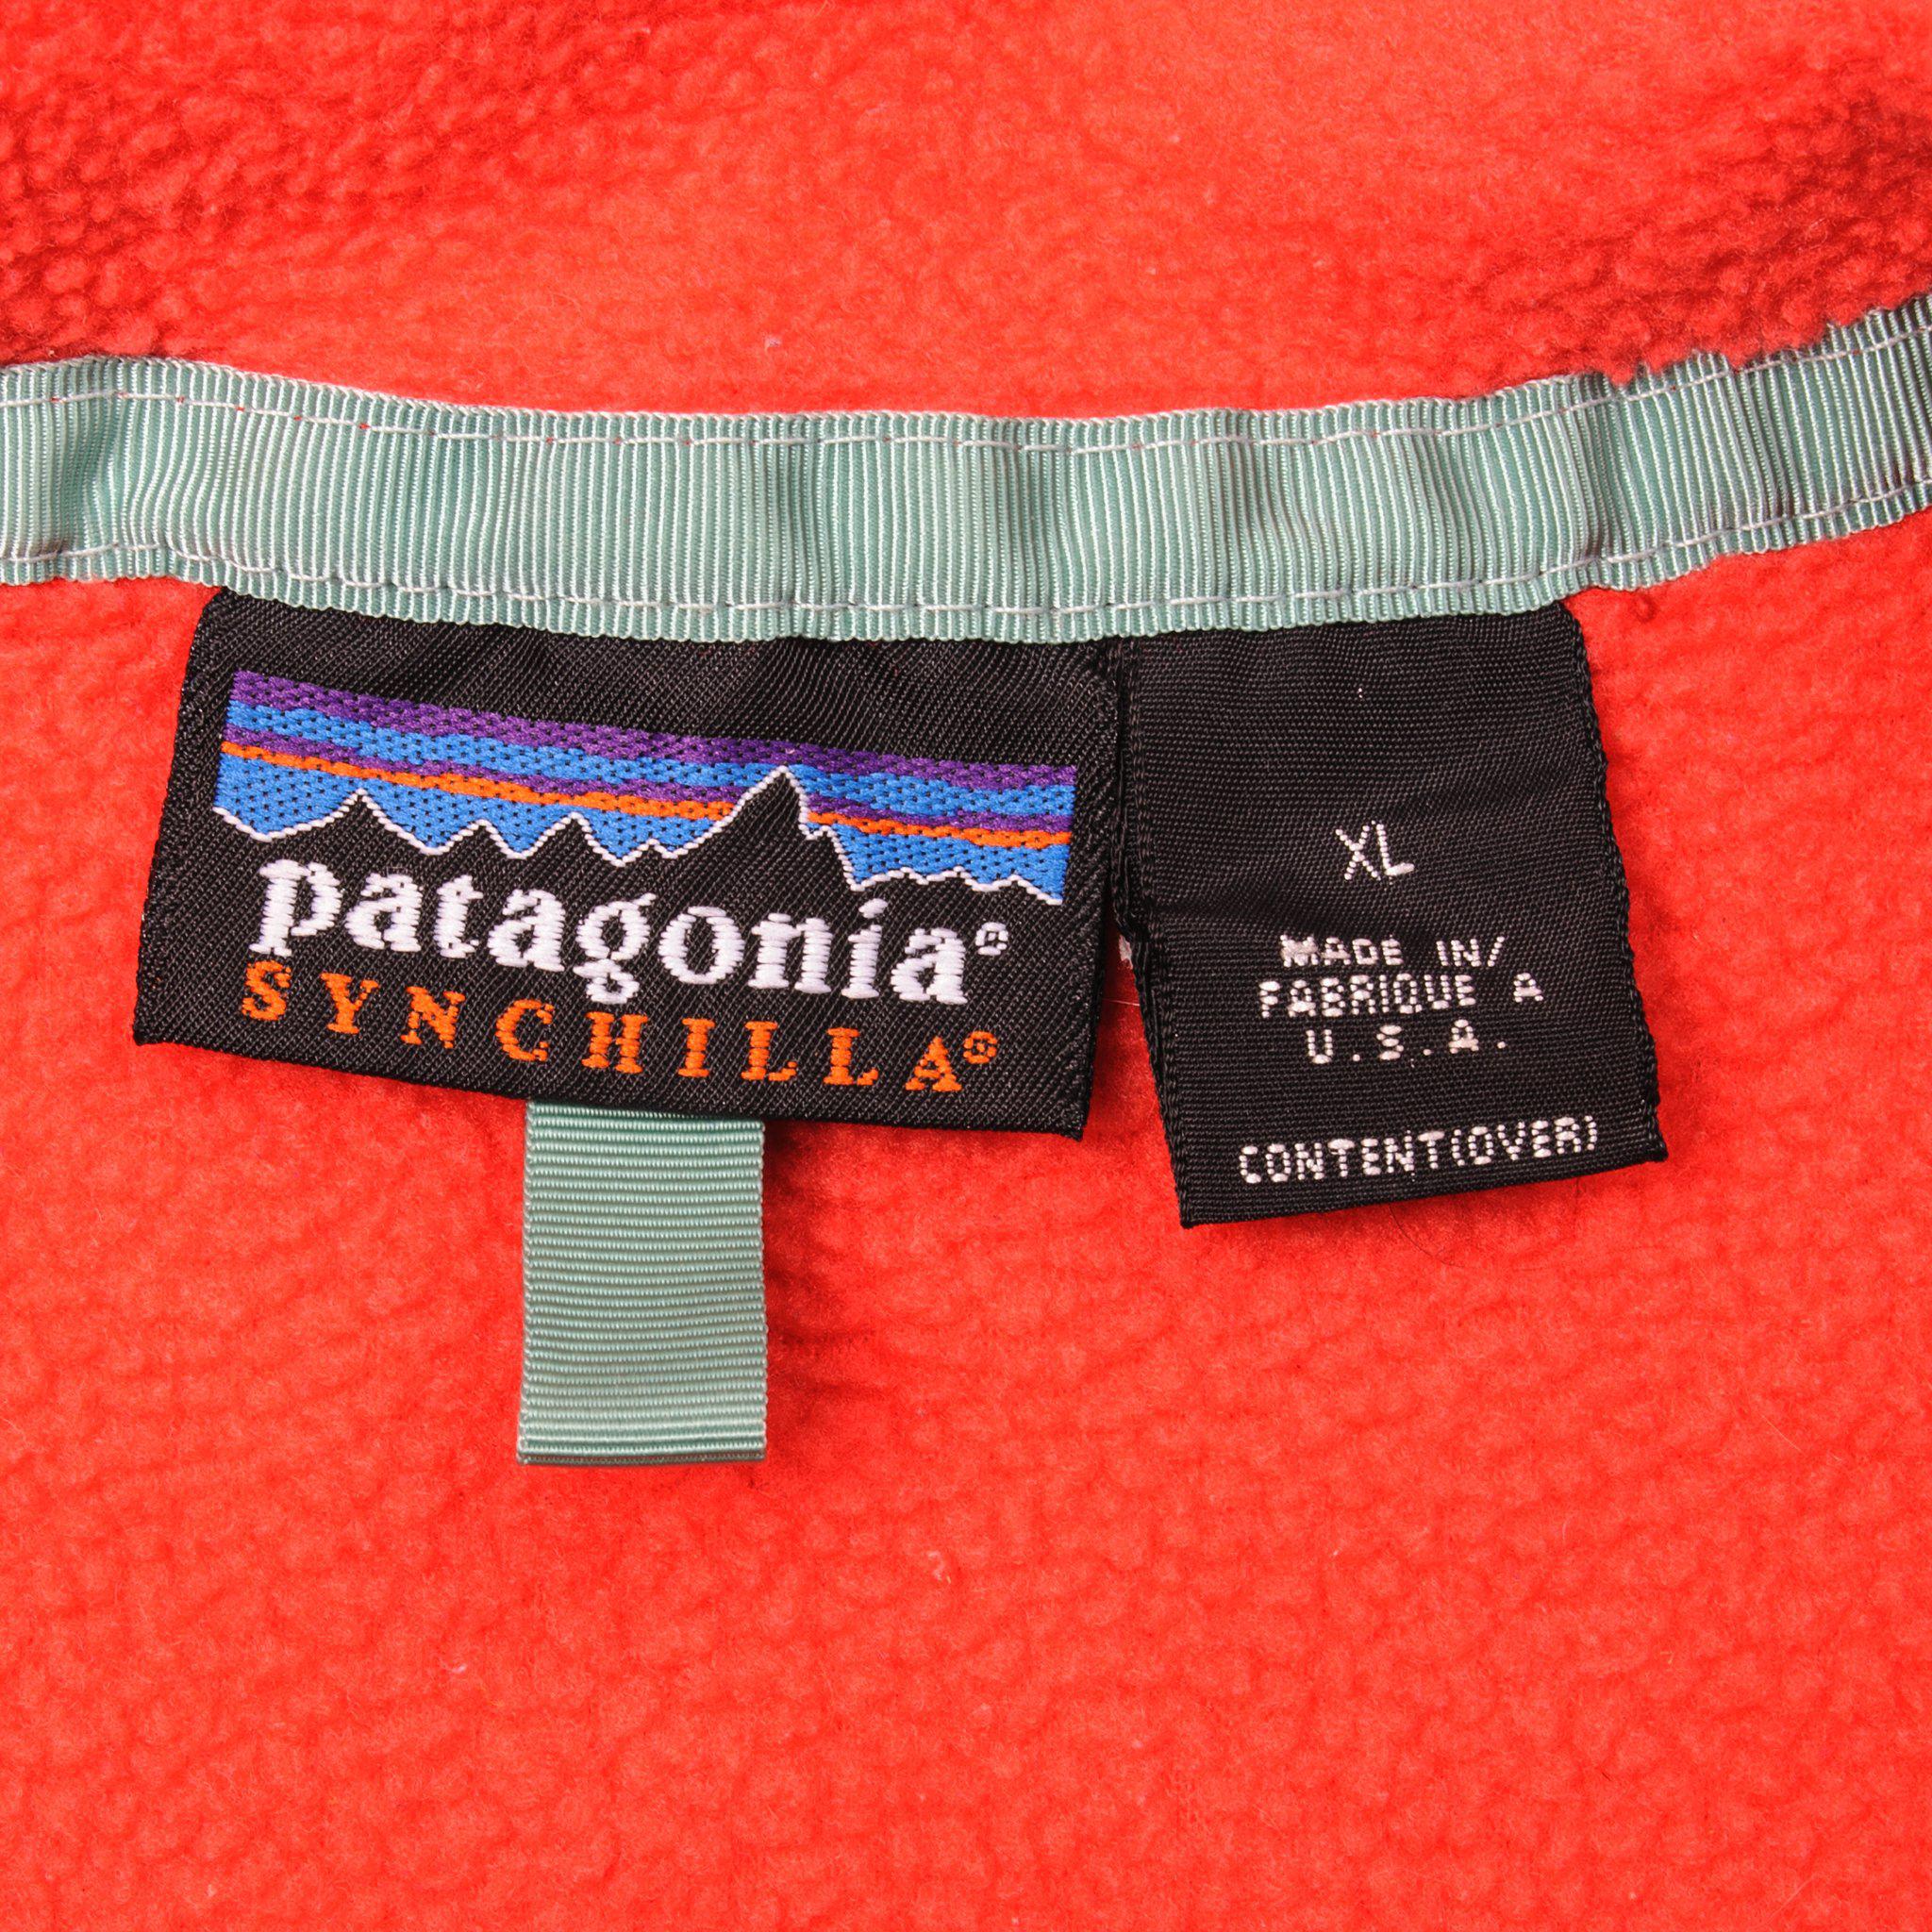 VINTAGE PATAGONIA SYNCHILLA SNAP-T FLEECE PULLOVER JACKET 1990S XL MADE IN  USA